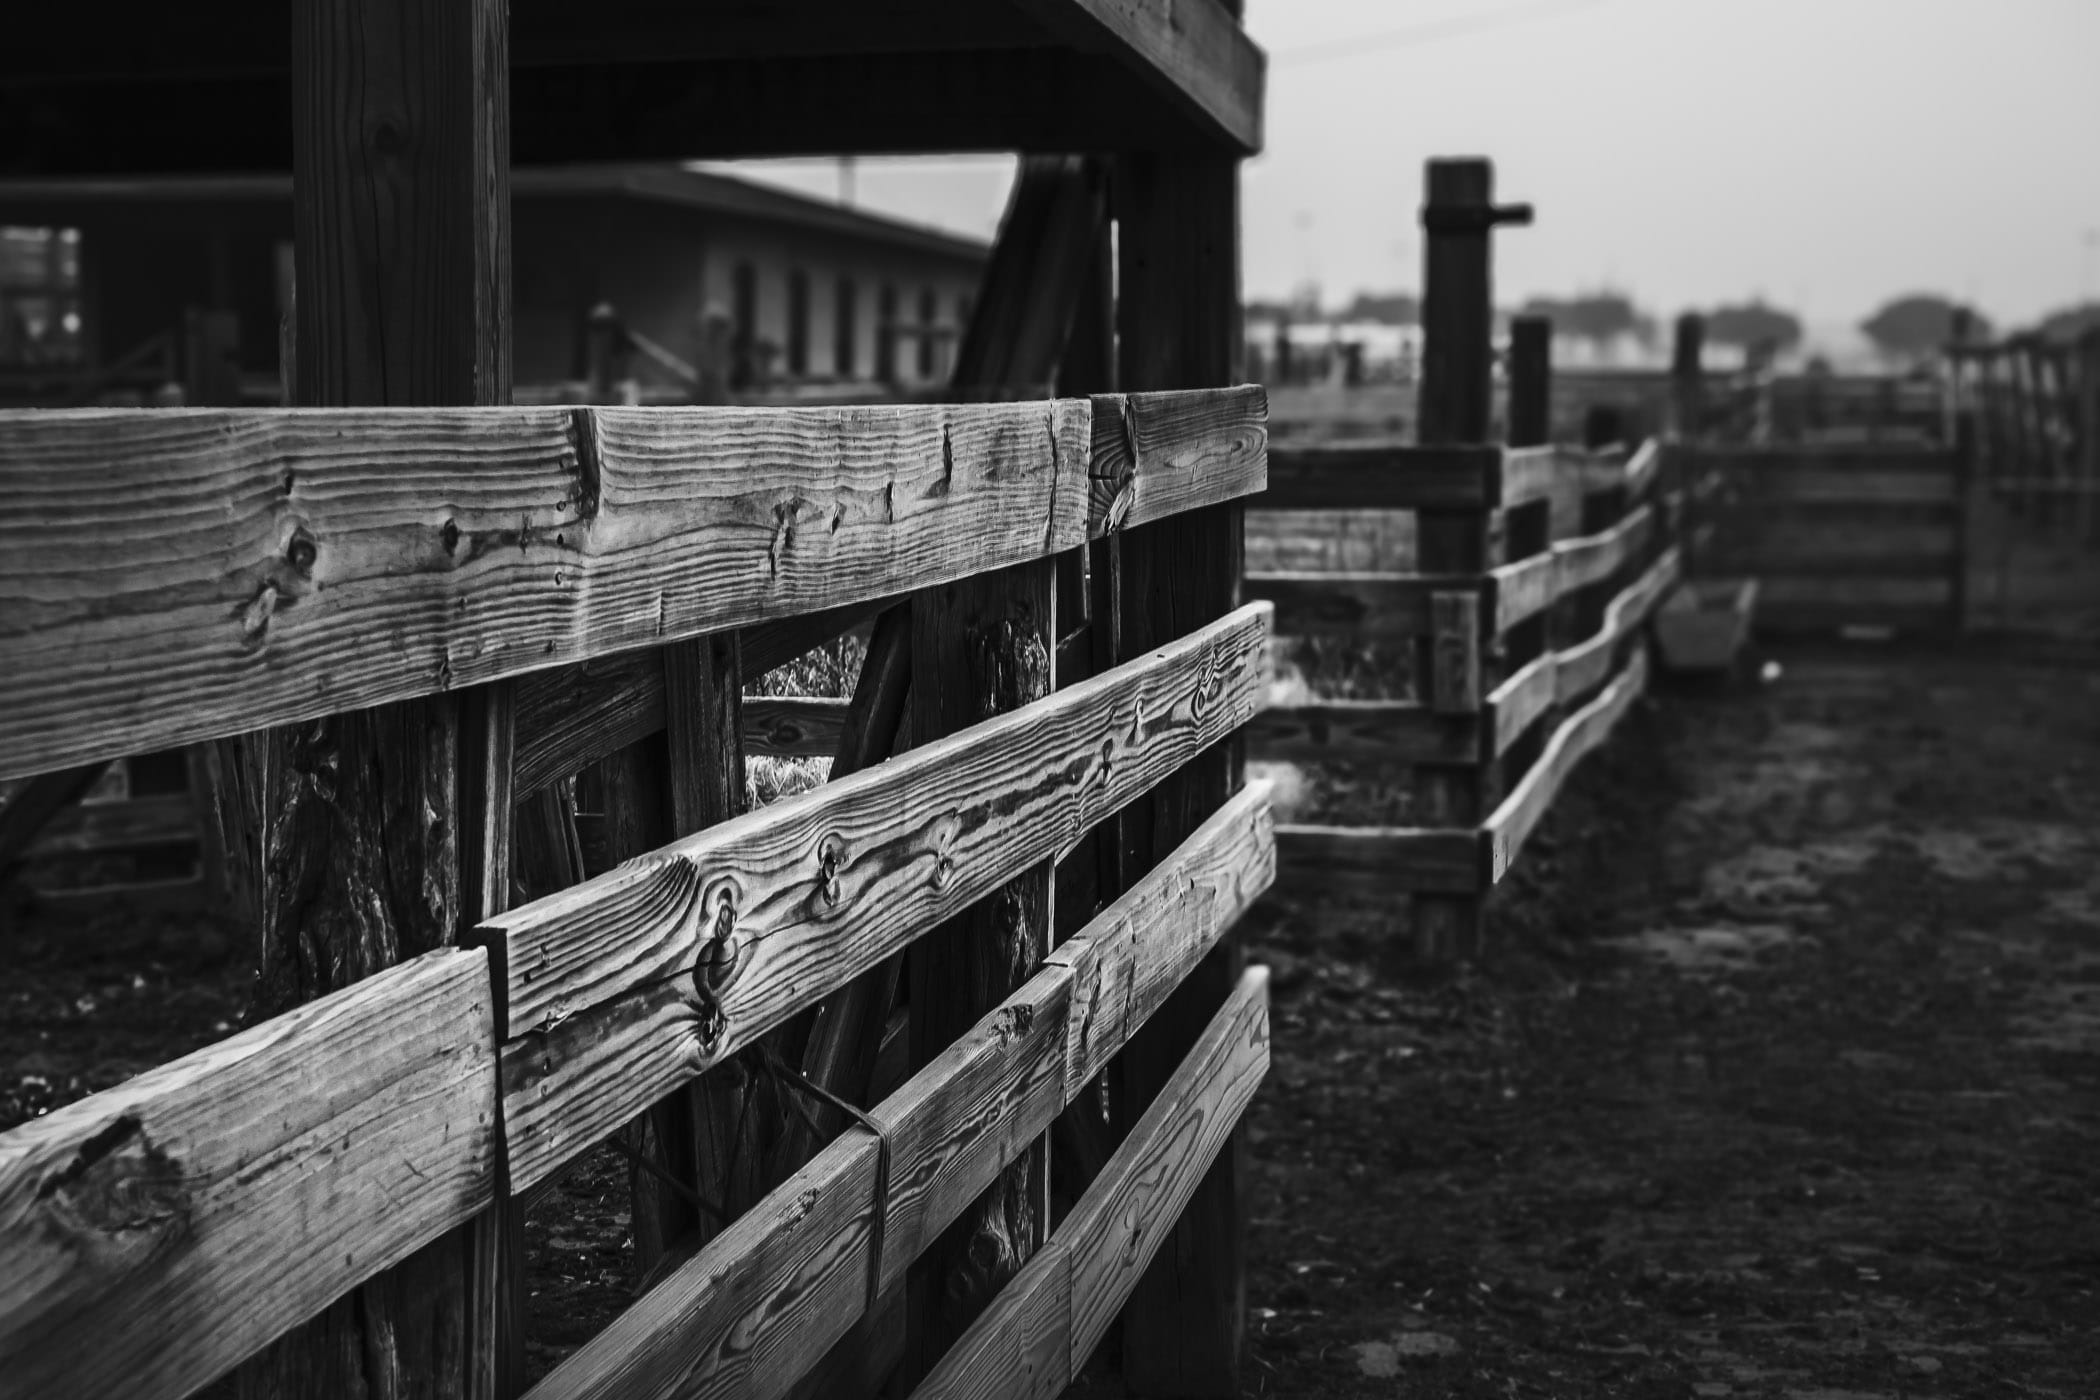 Wooden fences on old cattle pens at Fort Worth, Texas' historic Stockyards.